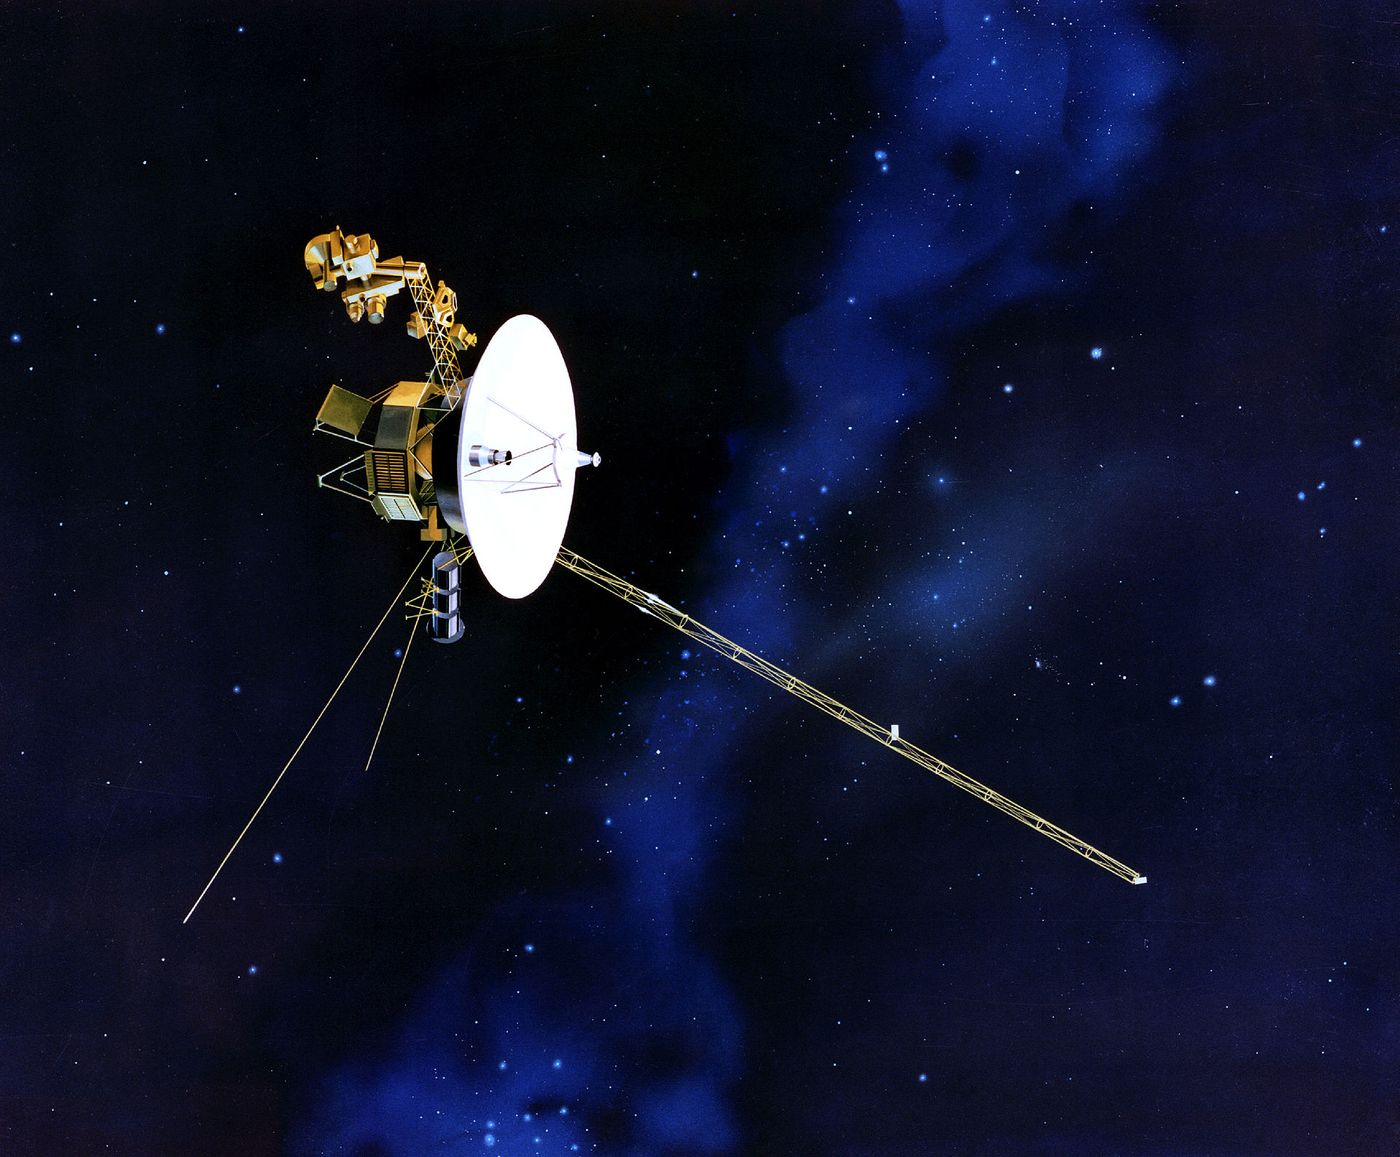 NASA wants to send a message to the Voyager 1 spacecraft on its 40th launch anniversary. What should they say?